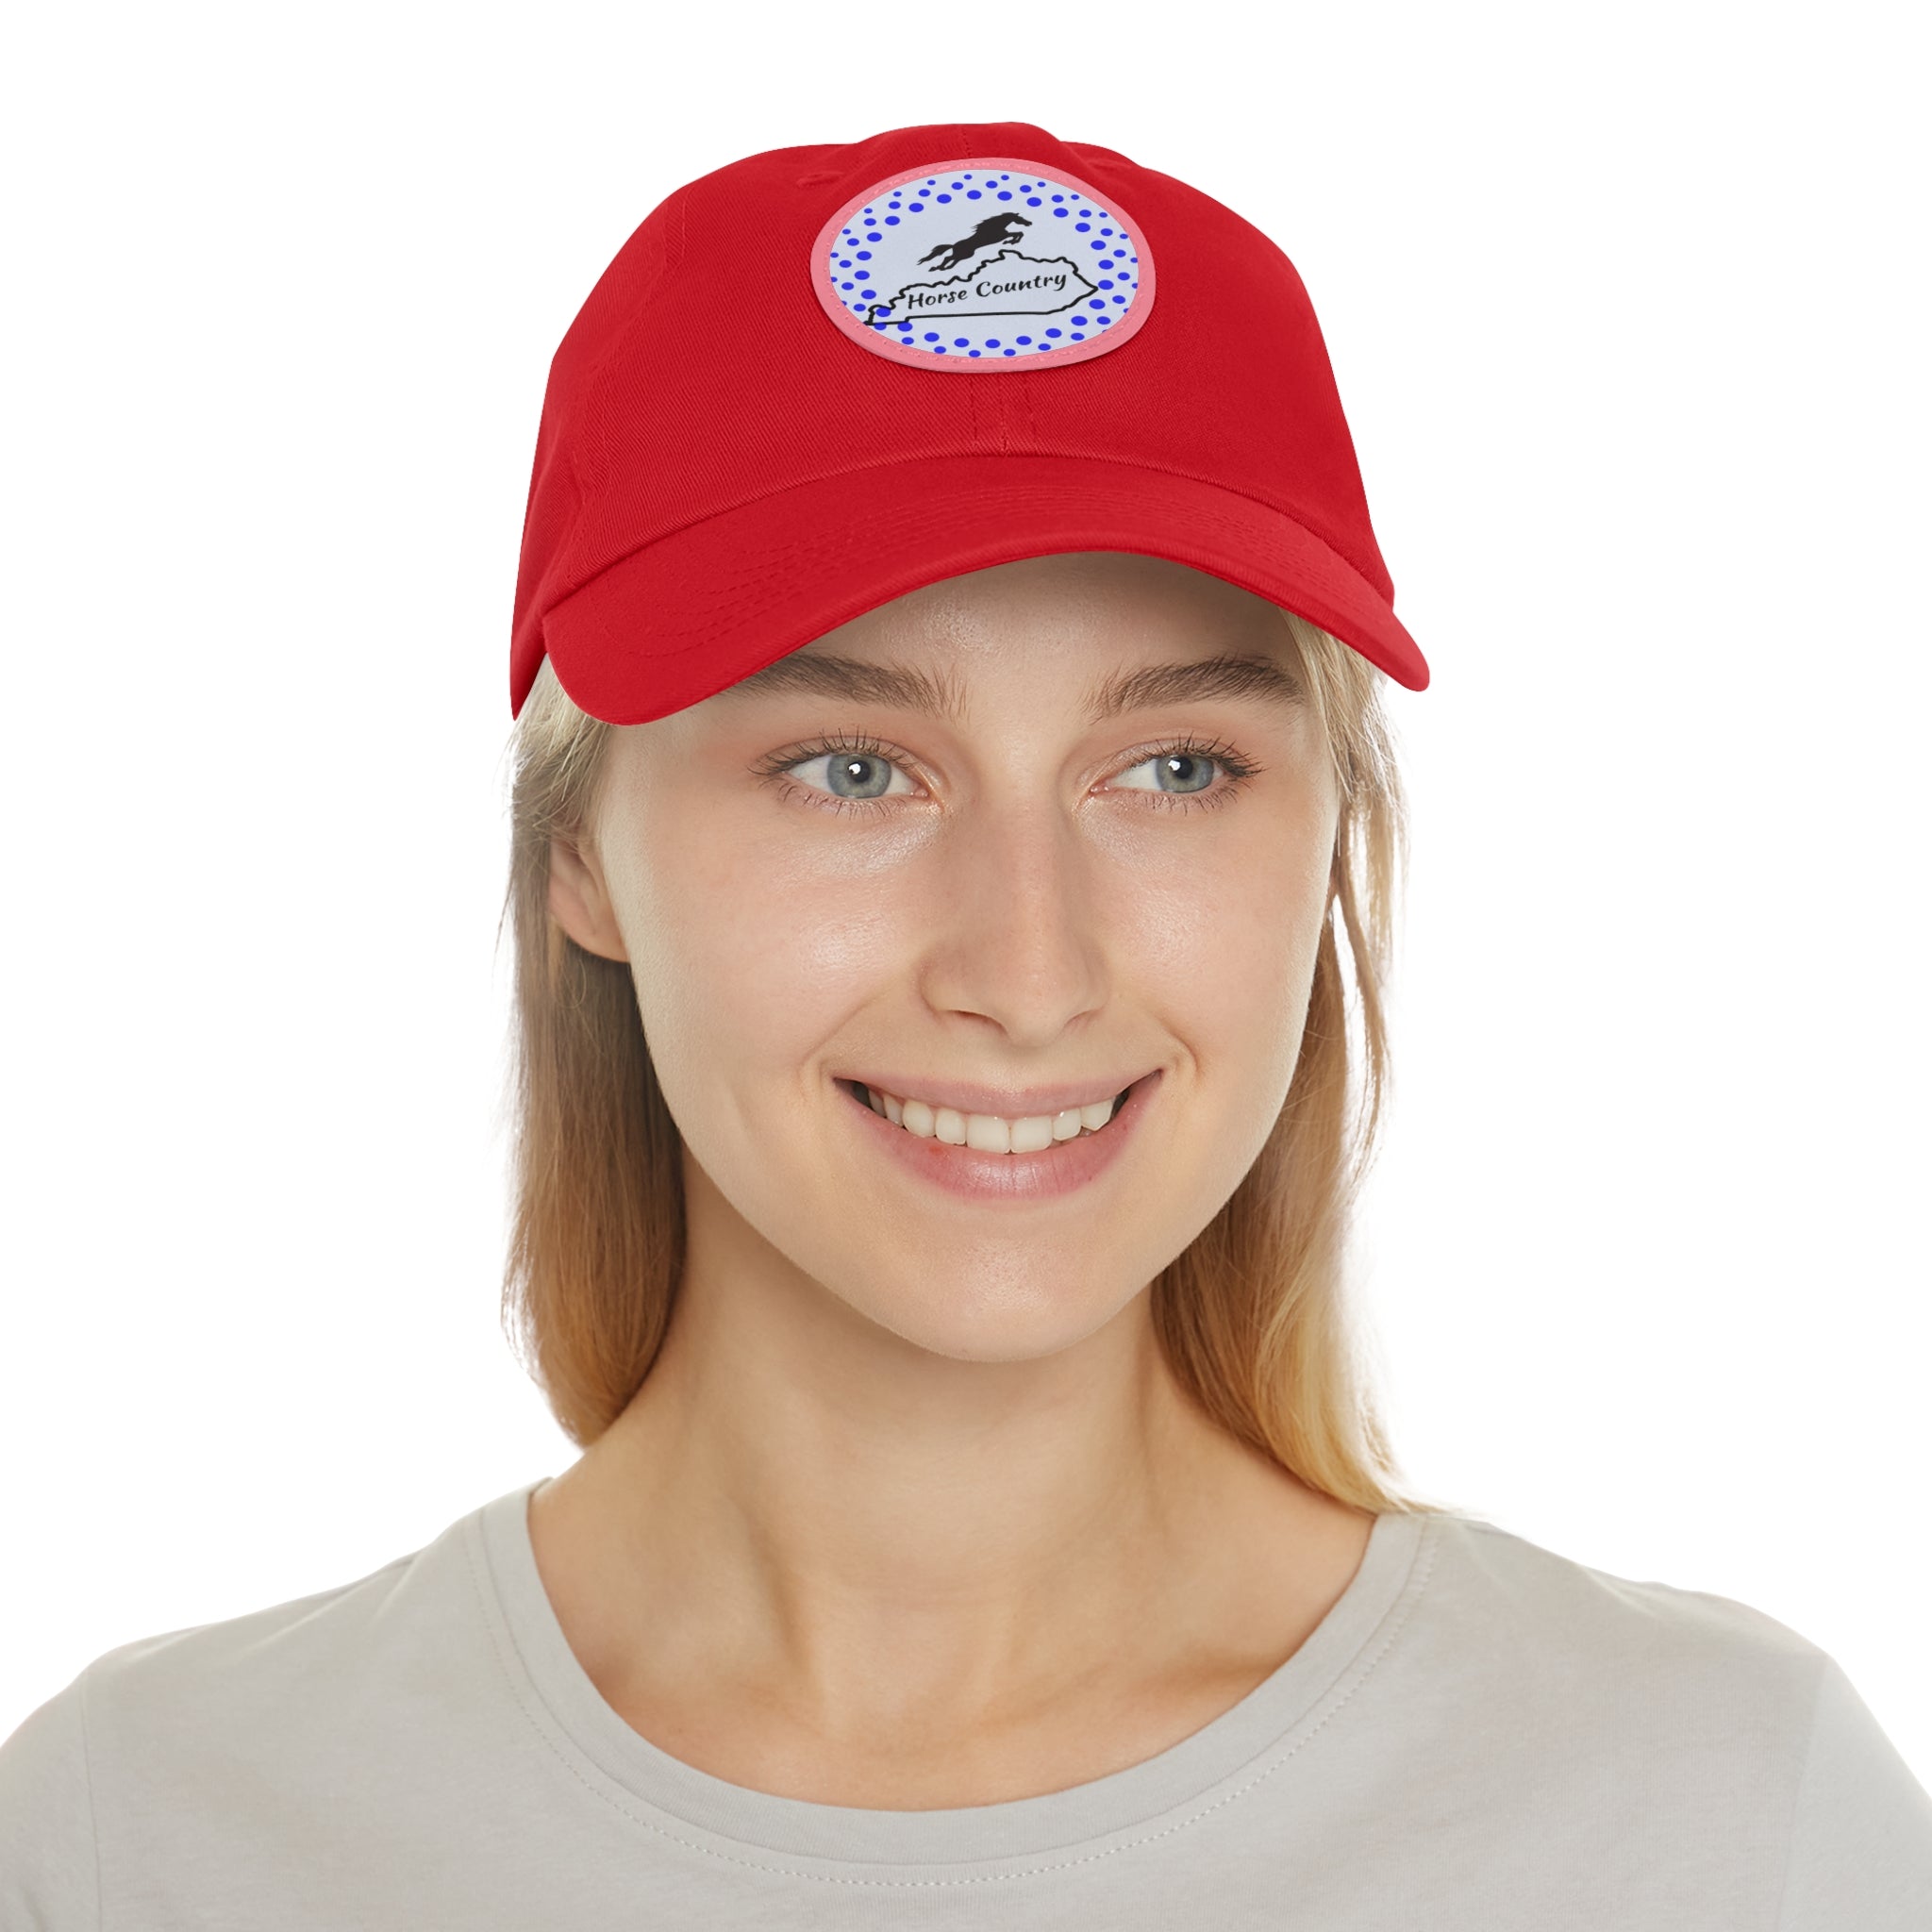 Kentucky is Horse Country Hat avec patch rond en cuir